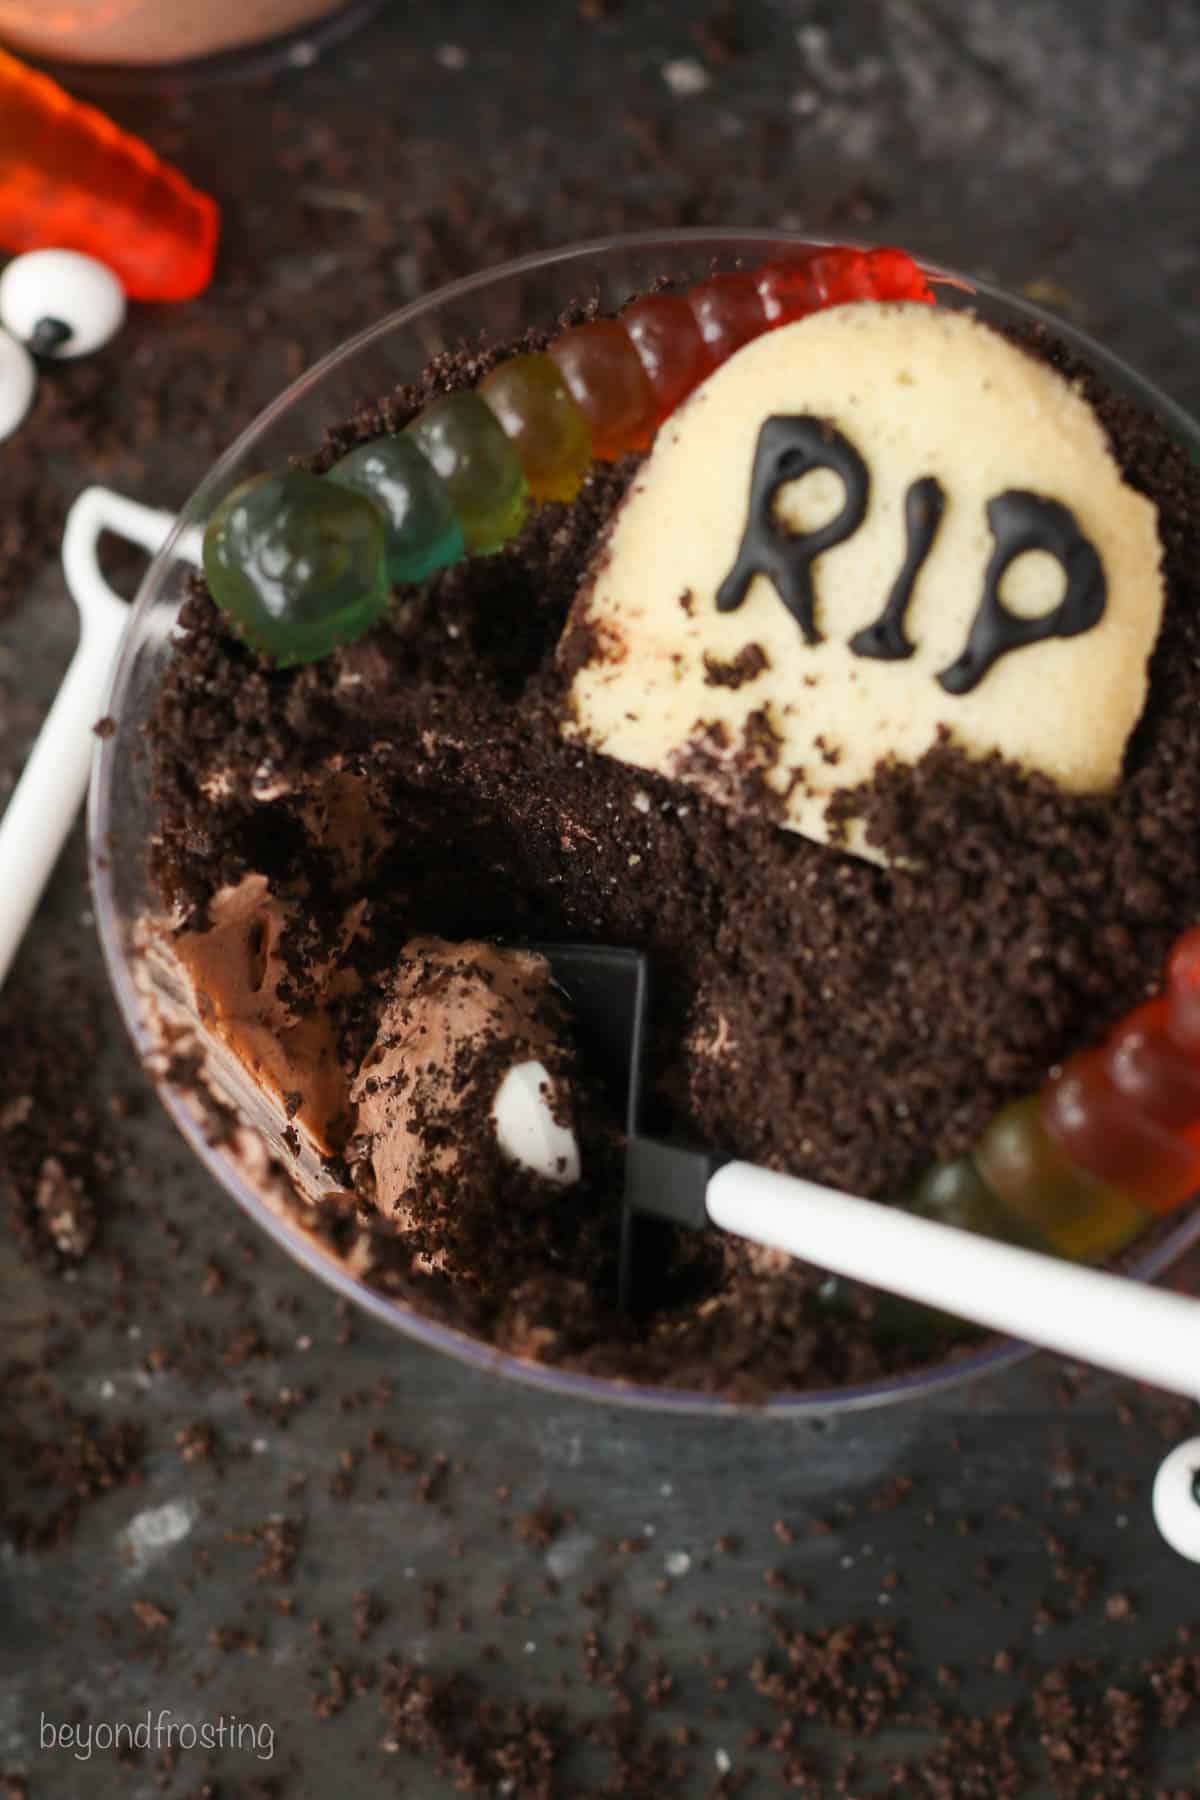 Overhead view of a decorated Halloween dirt cup with a scoop mmissing.